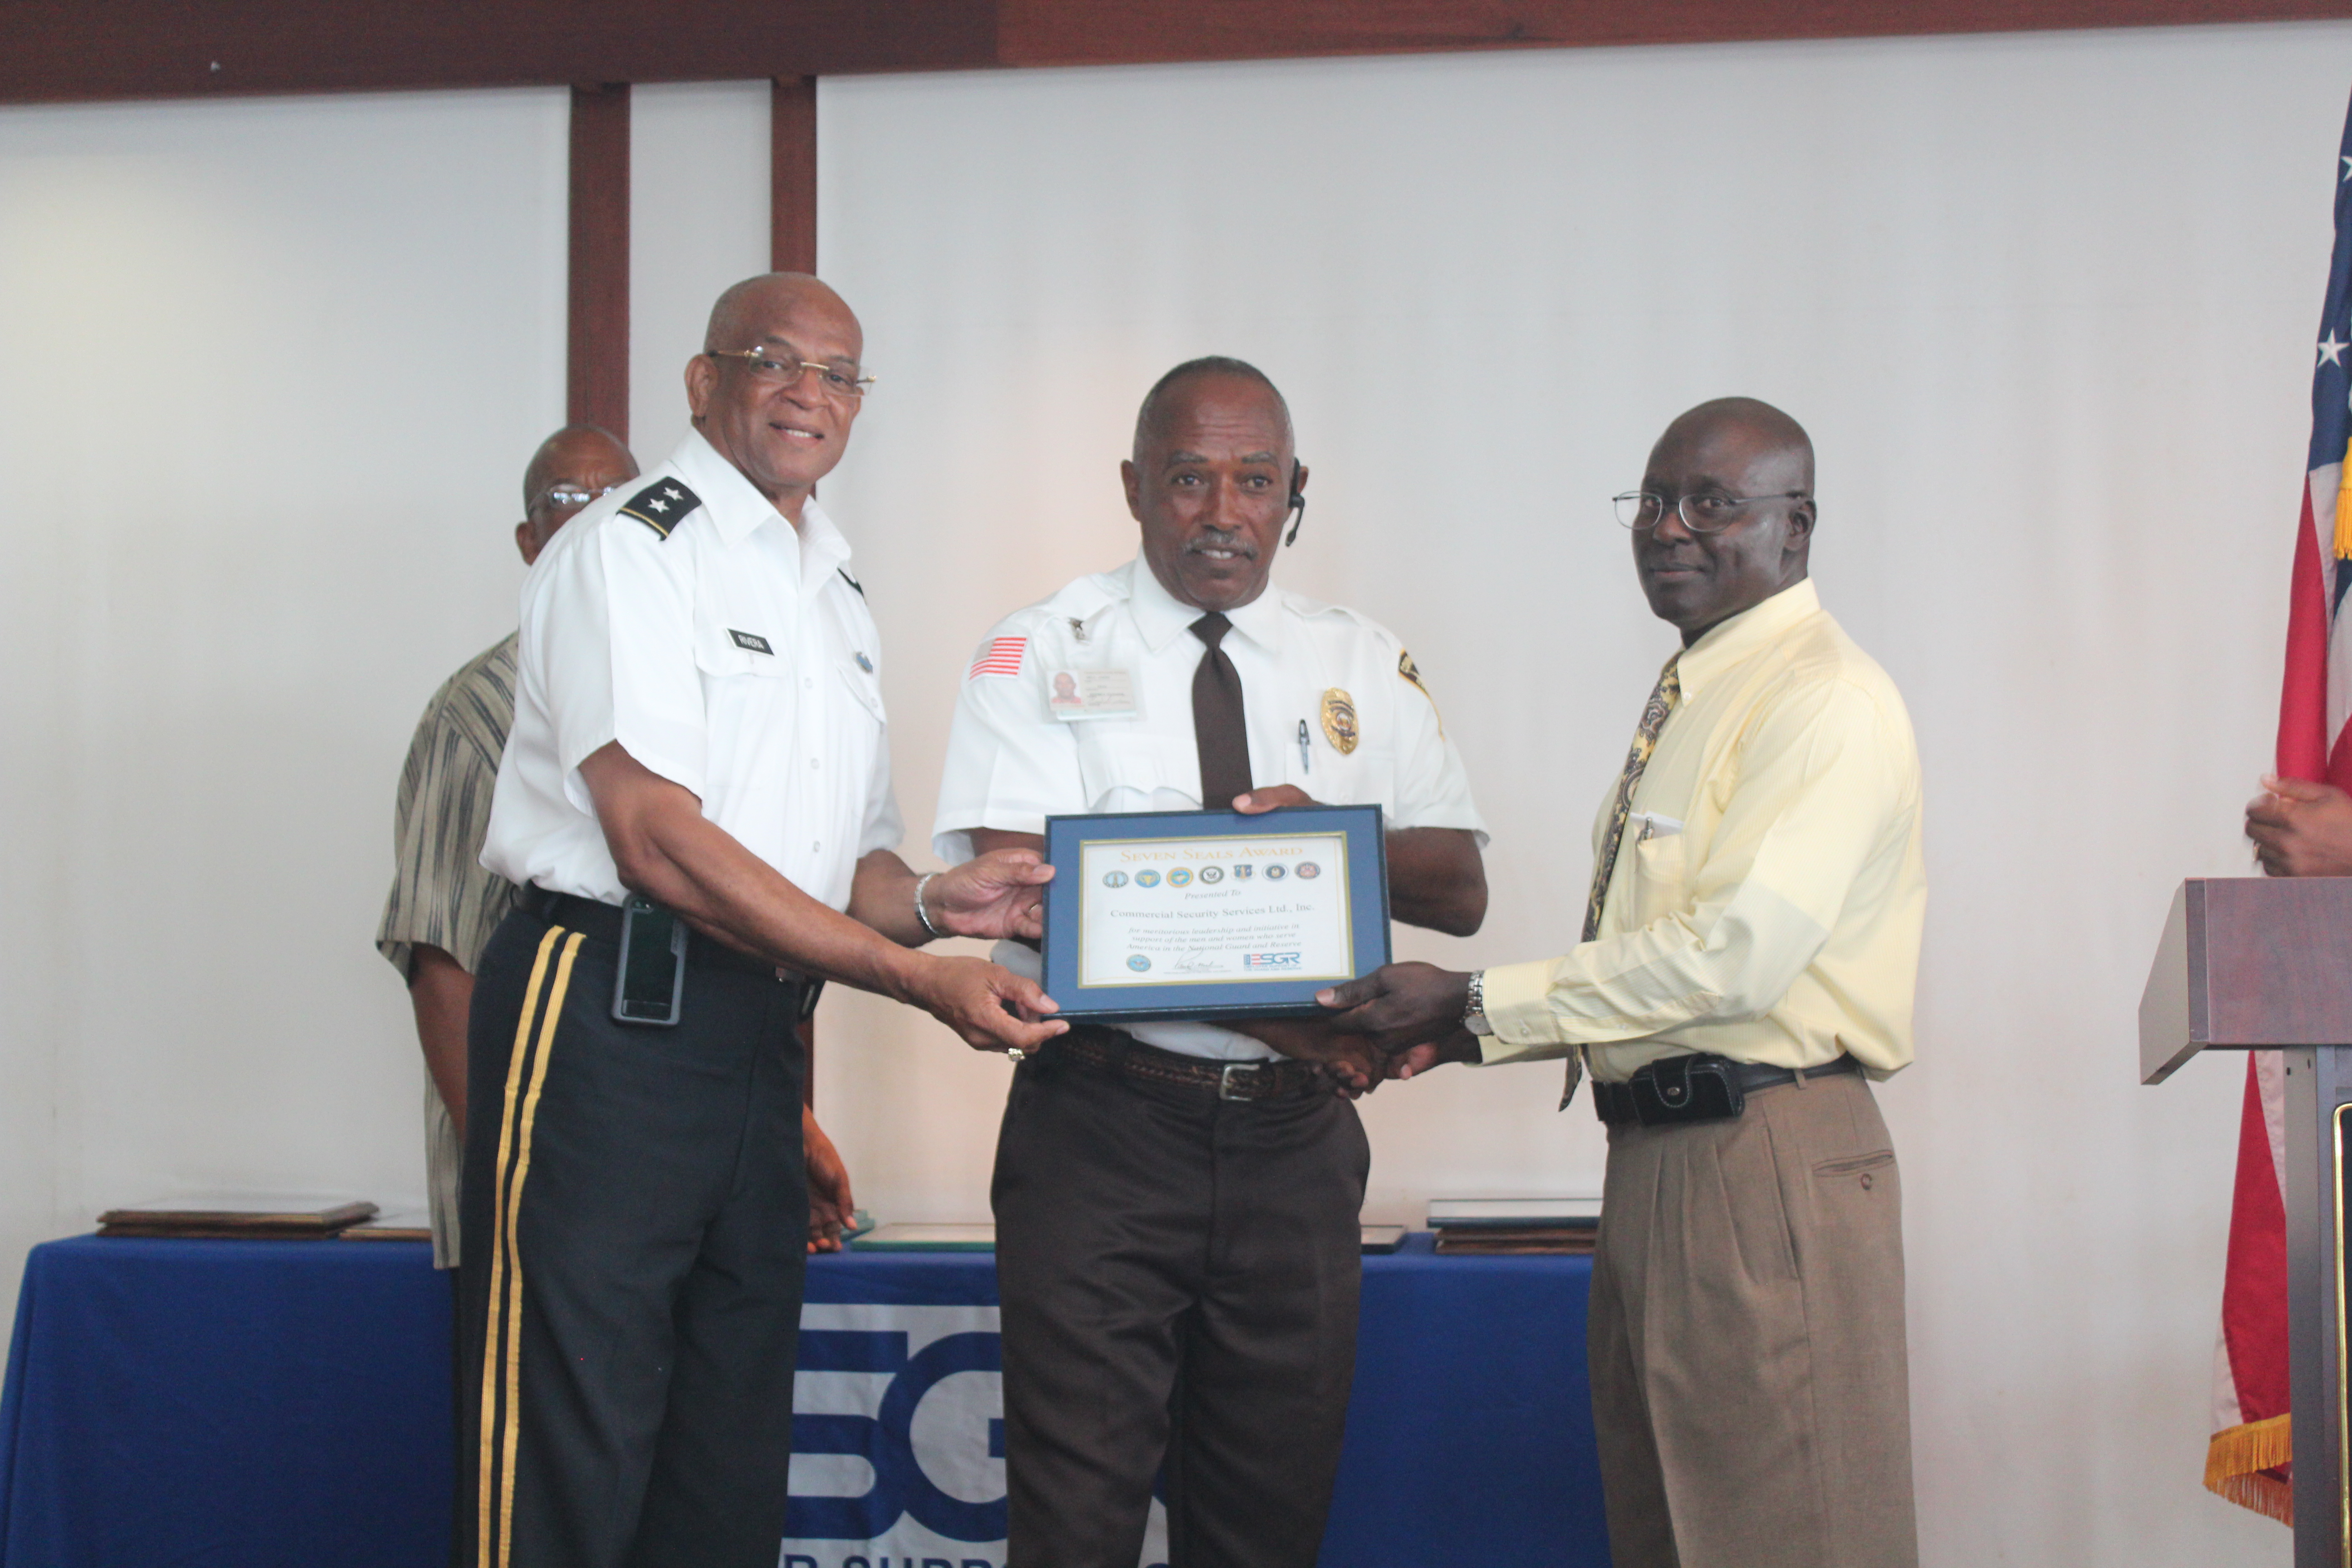 Adjutant General Major General Renaldo Rivera and V.I. State Chair present Commercial Security Services Inc. with a Seven Seals Award. Emil James, director, accepted the award on behalf of the company. James stated, "He hires military personnel because of their appearance and ability to work long hours and at remote locations."